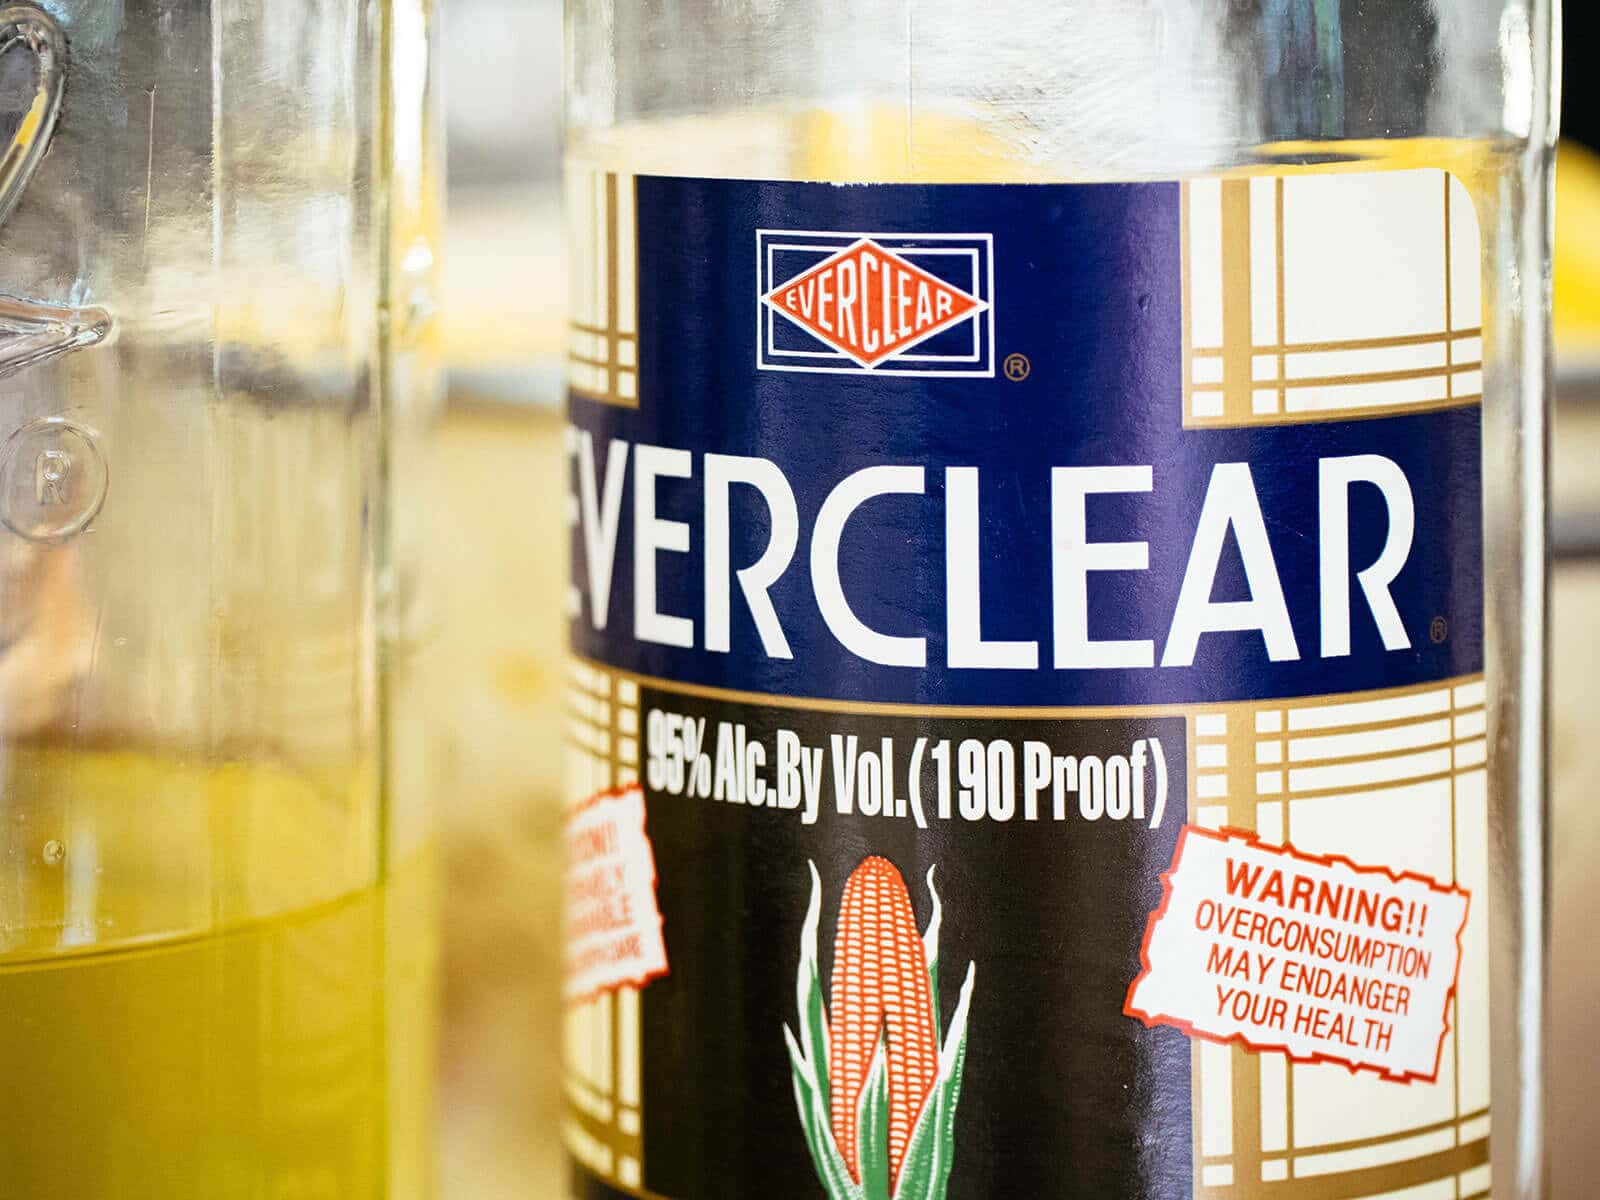 Close-up of Everclear bottle label